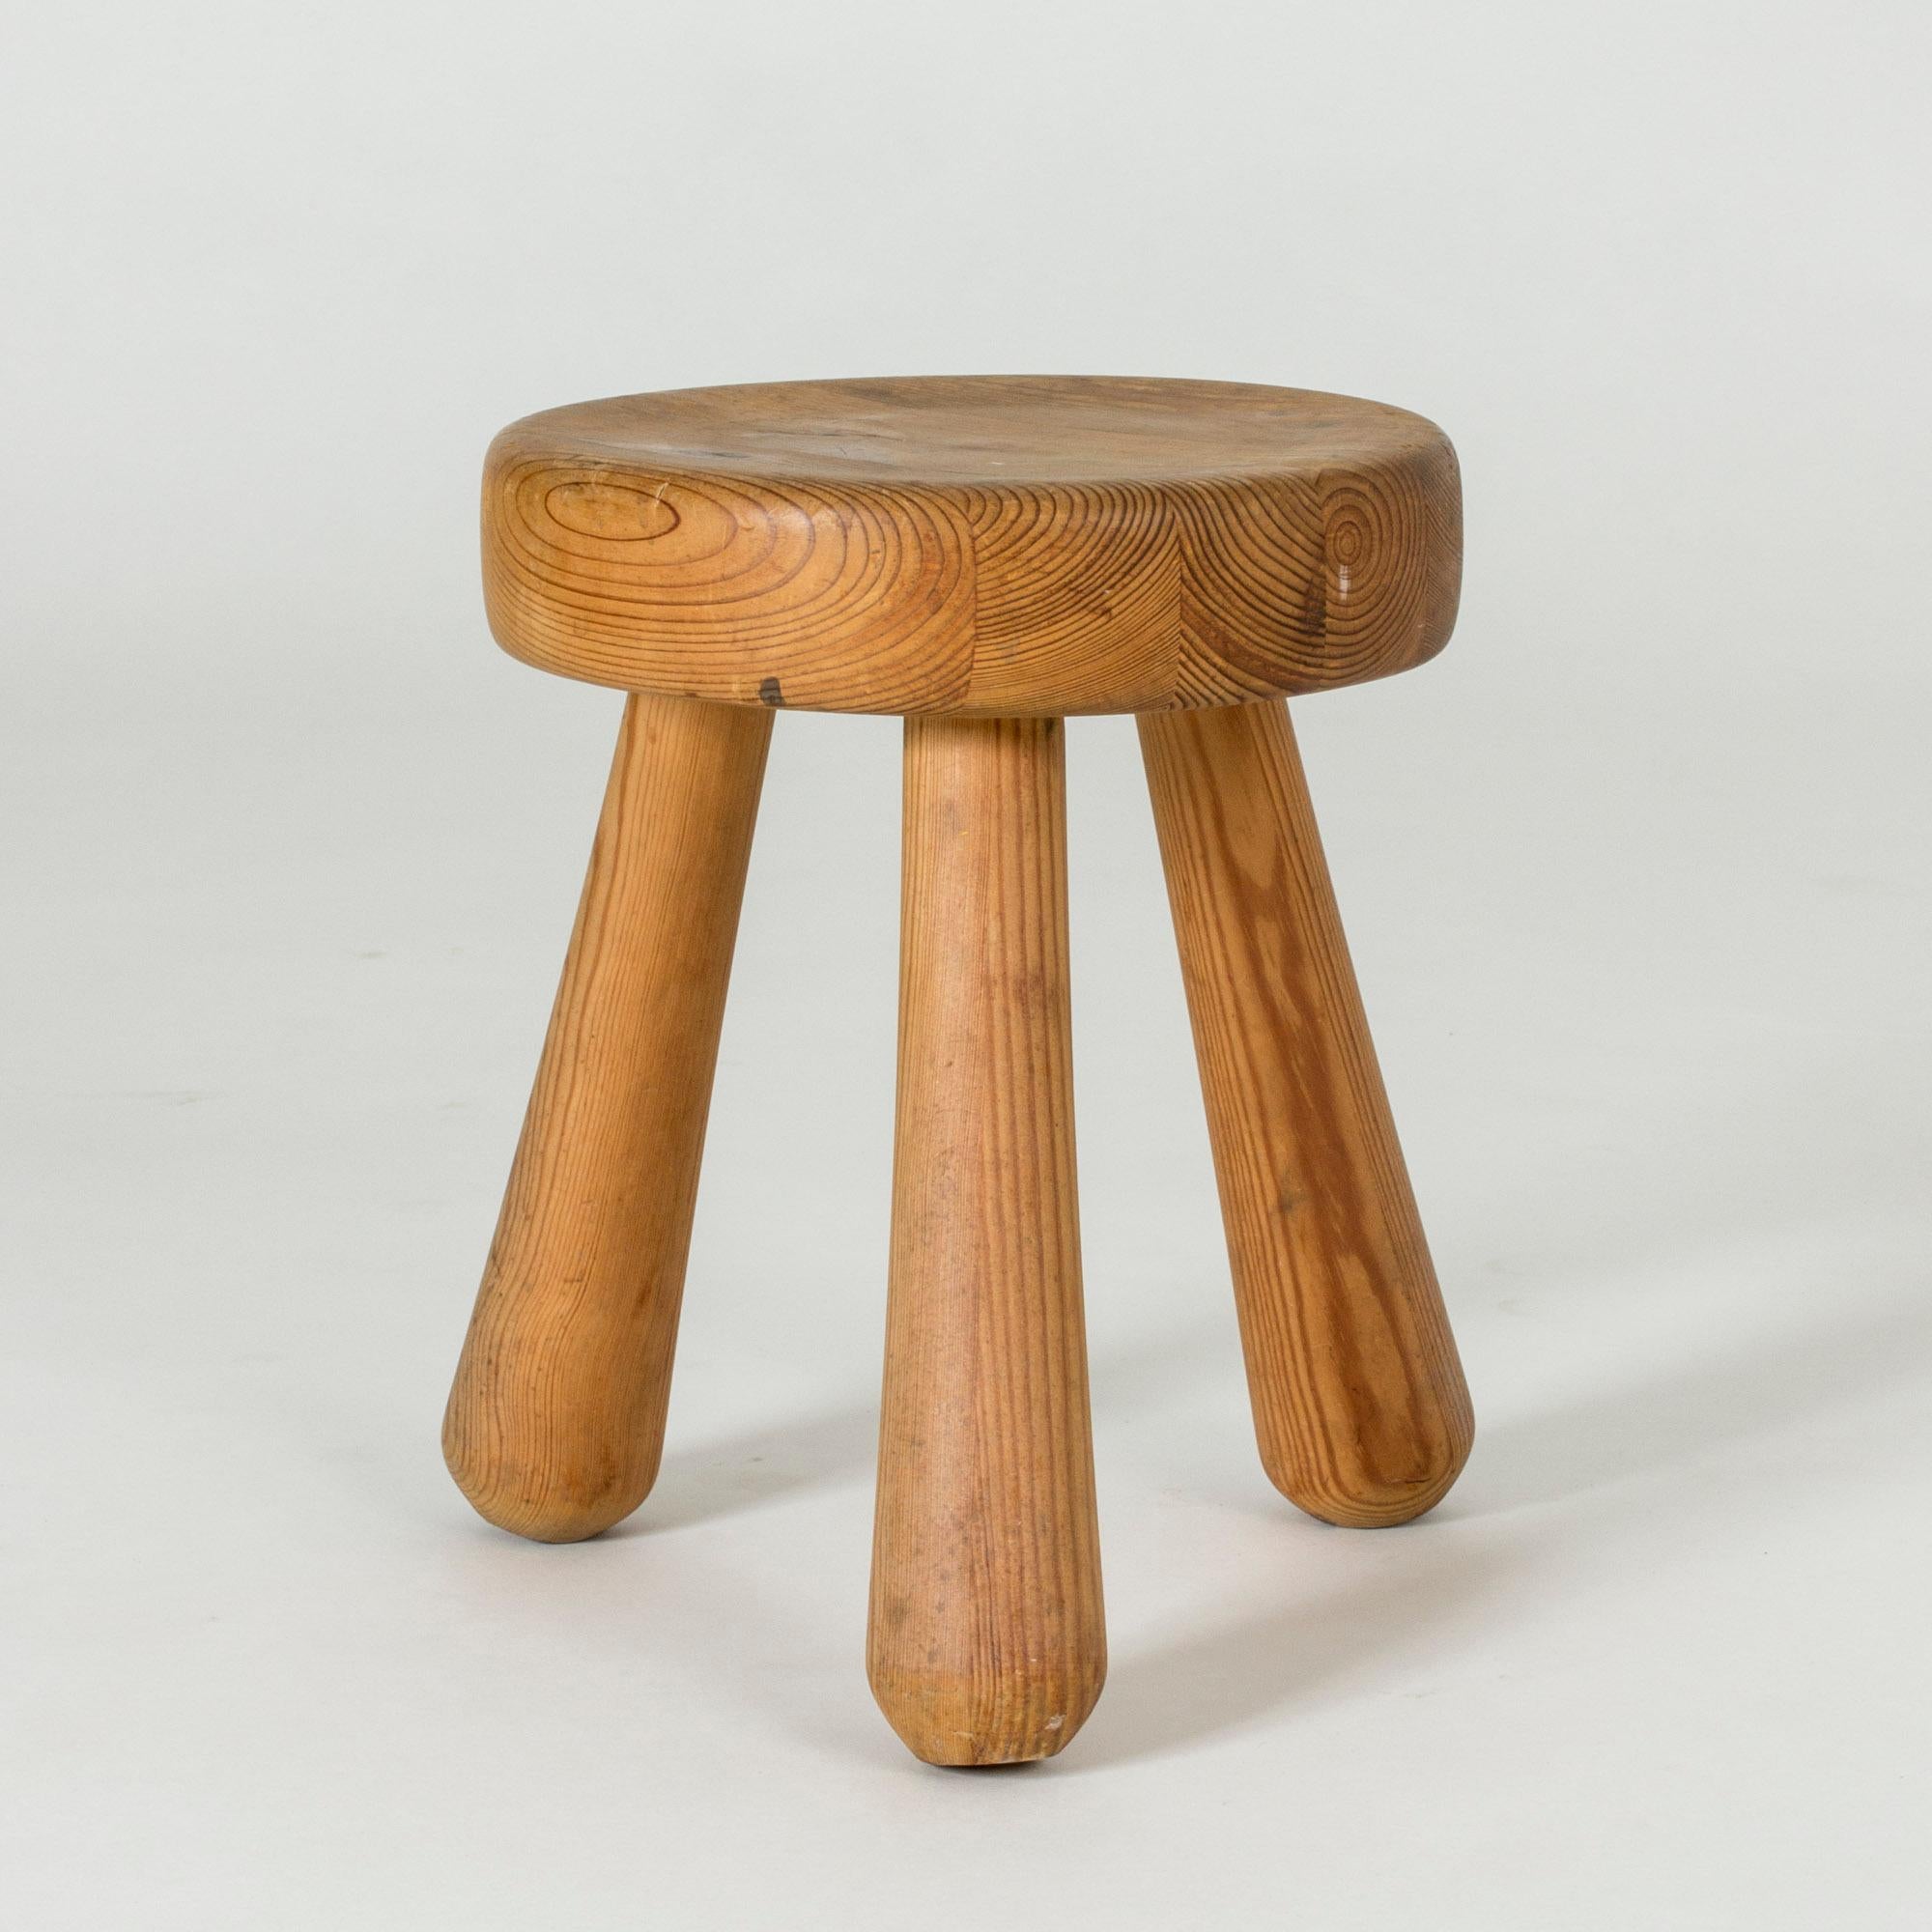 Chunky wooden stool by Ingvar Hildingsson, made from pine with beautiful wood grain. Three legs and round seat, designed in a clean, appealing form.